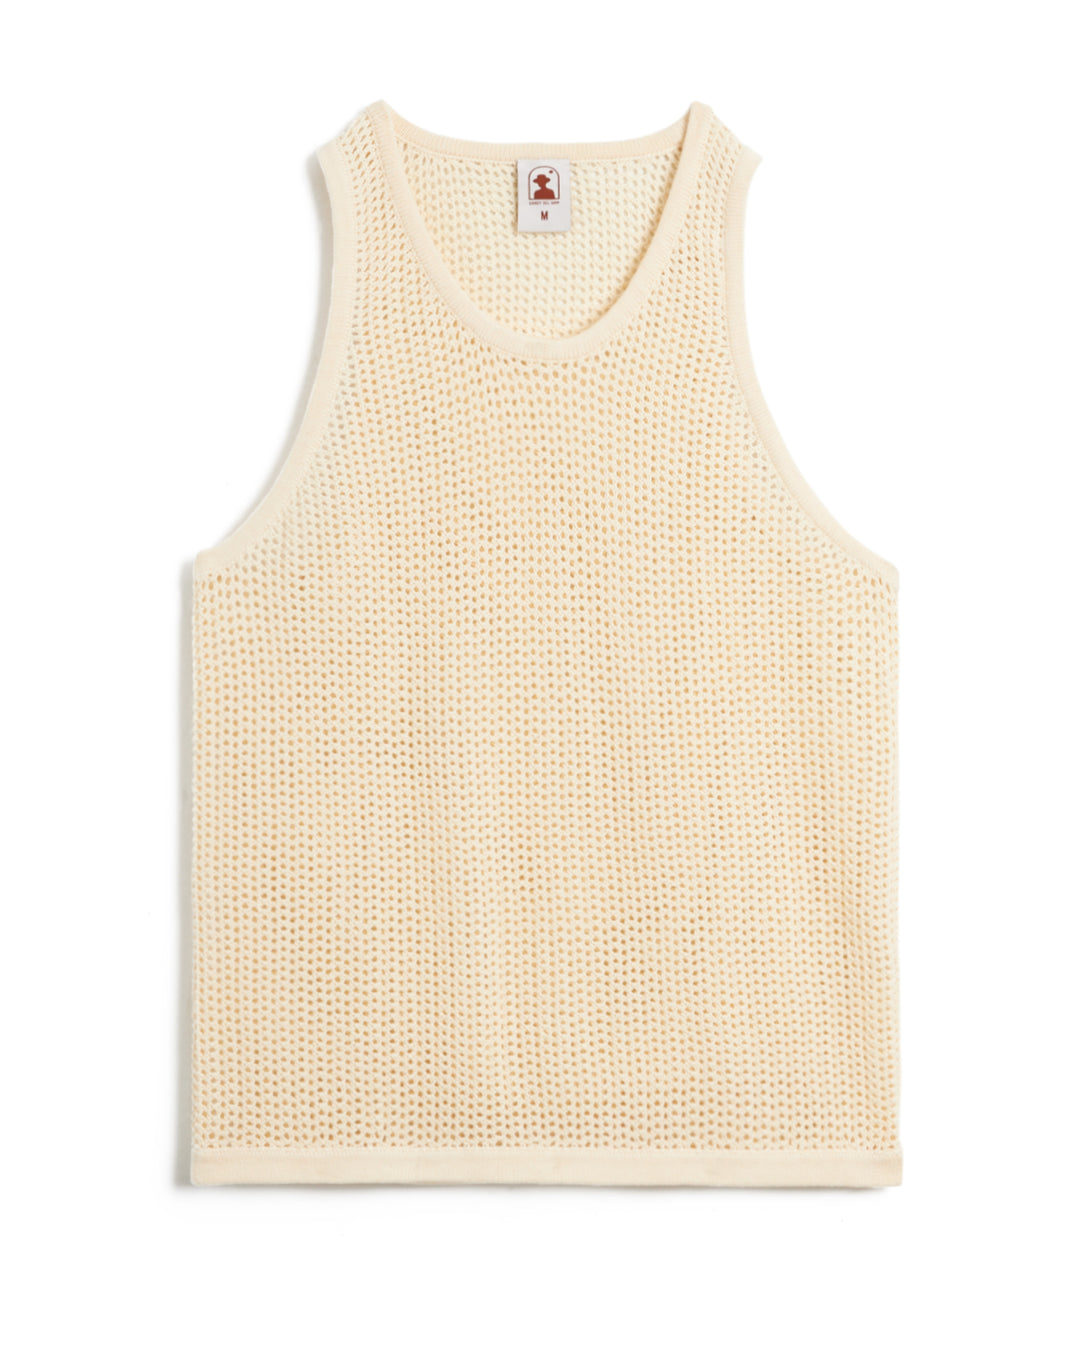 The Dominica Crochet Tank - Vintage Ivory by Dandy Del Mar on a white background.